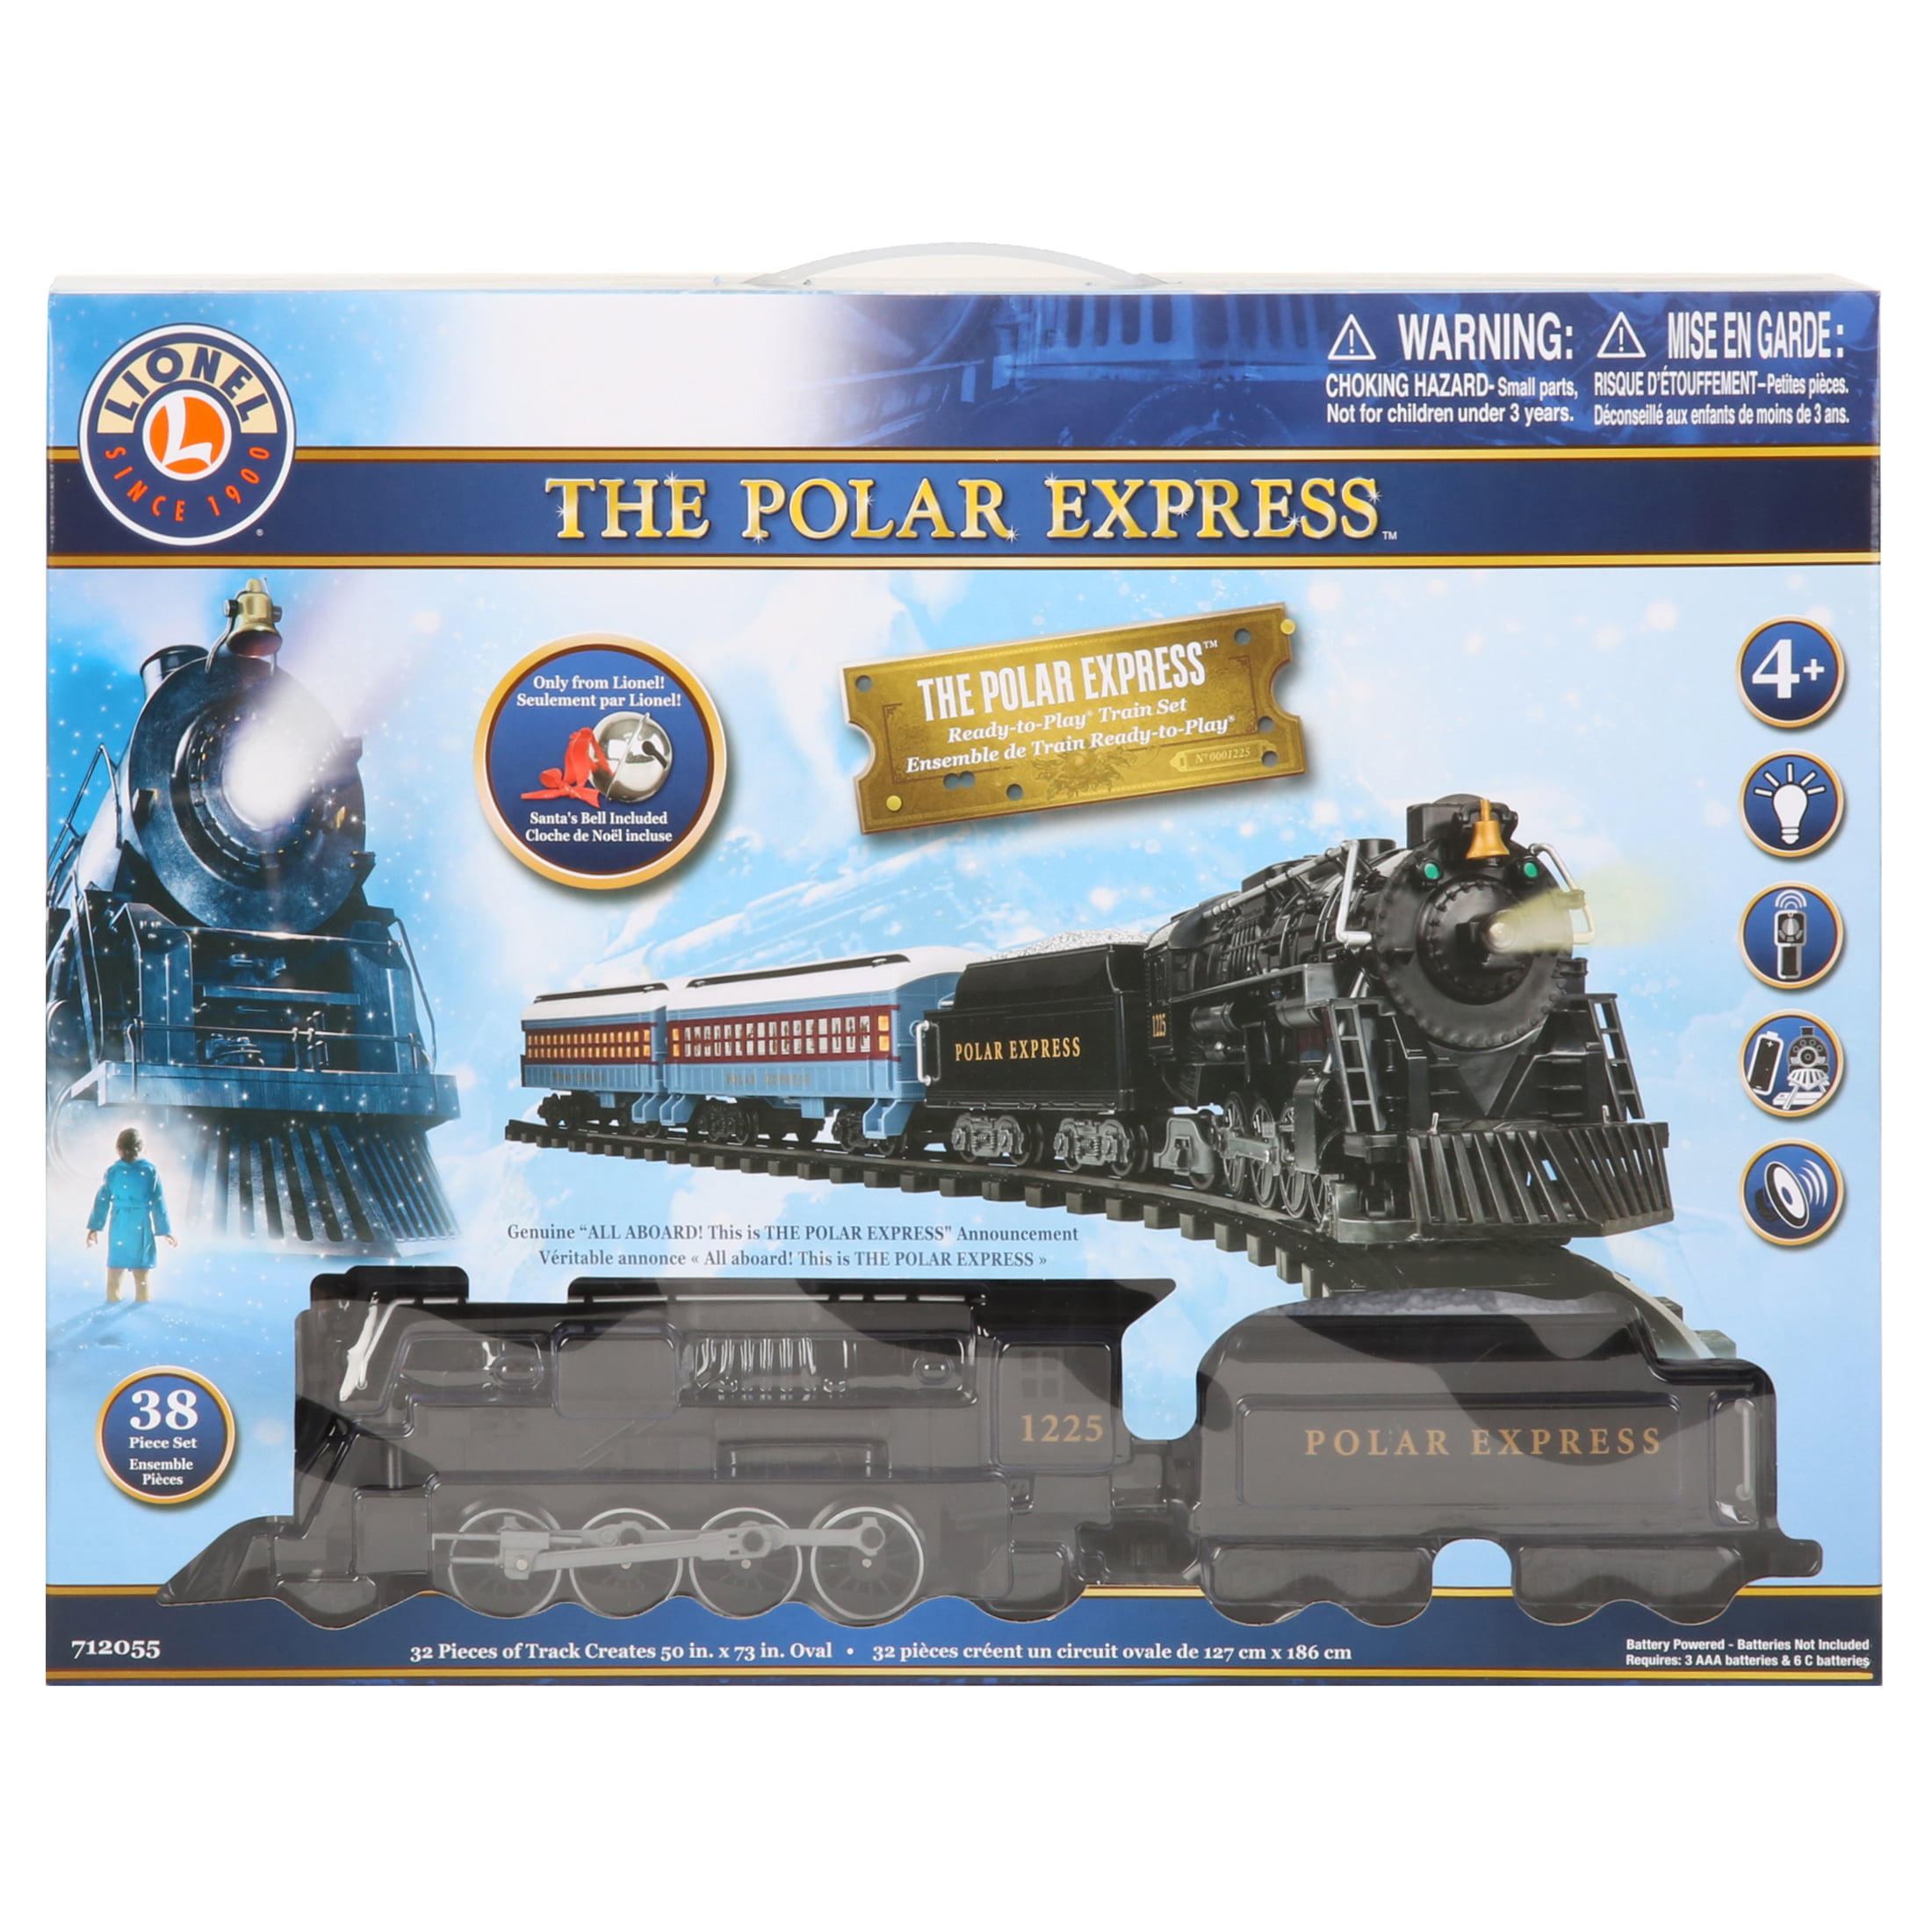 Lionel The Polar Express Ready to Play Train Set LIO711803 for sale online 